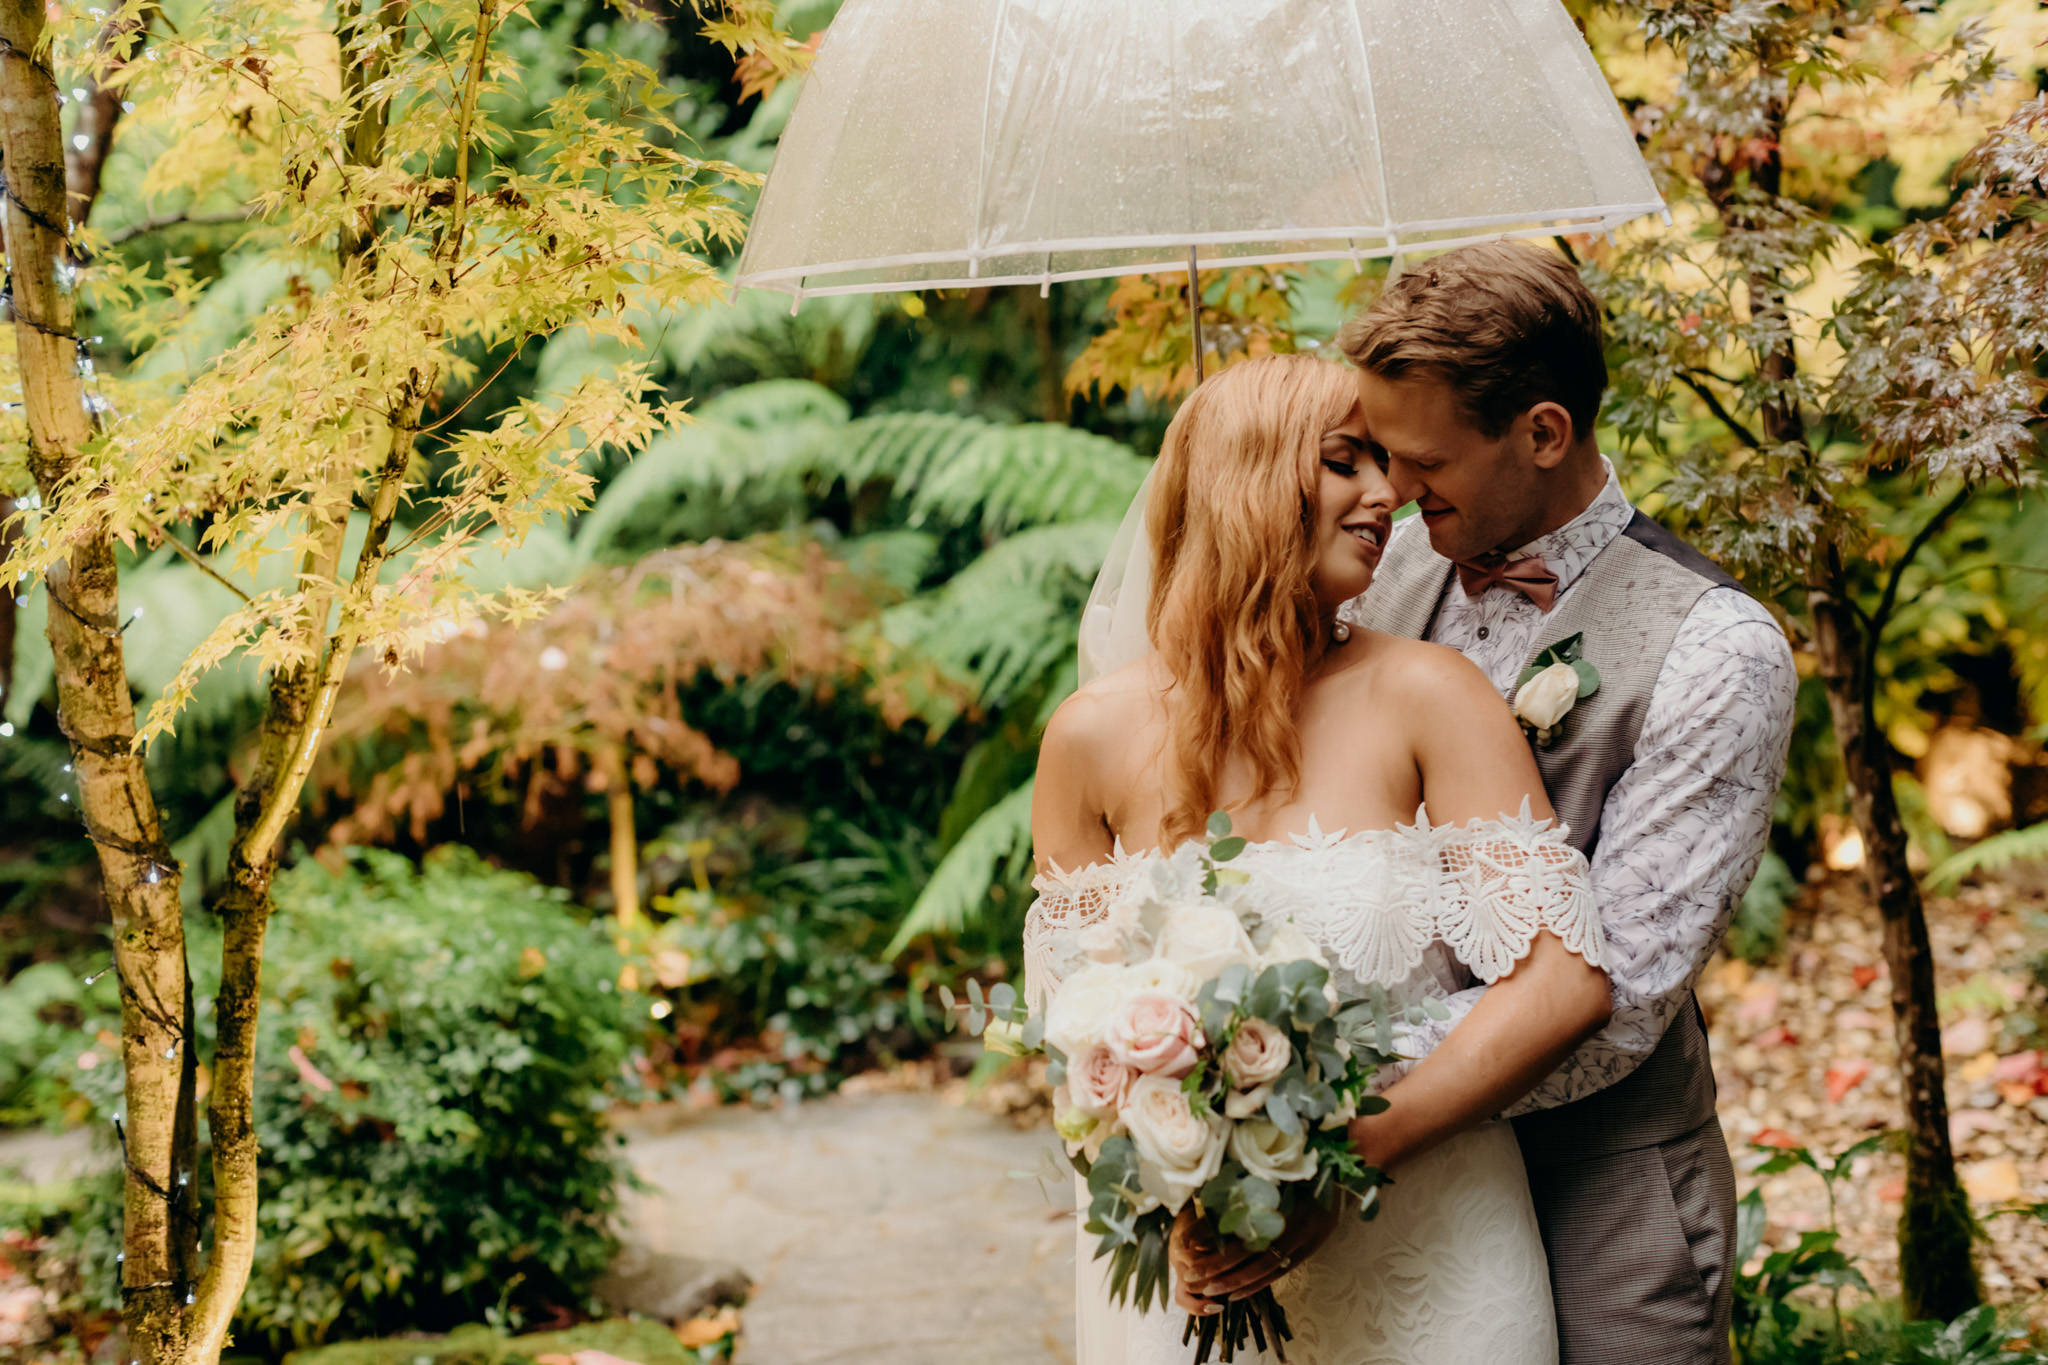 Lyrebird Falls Dandenong Ranges Wedding, classic and romantic, for Grace & Mike. Photos by T-One Image